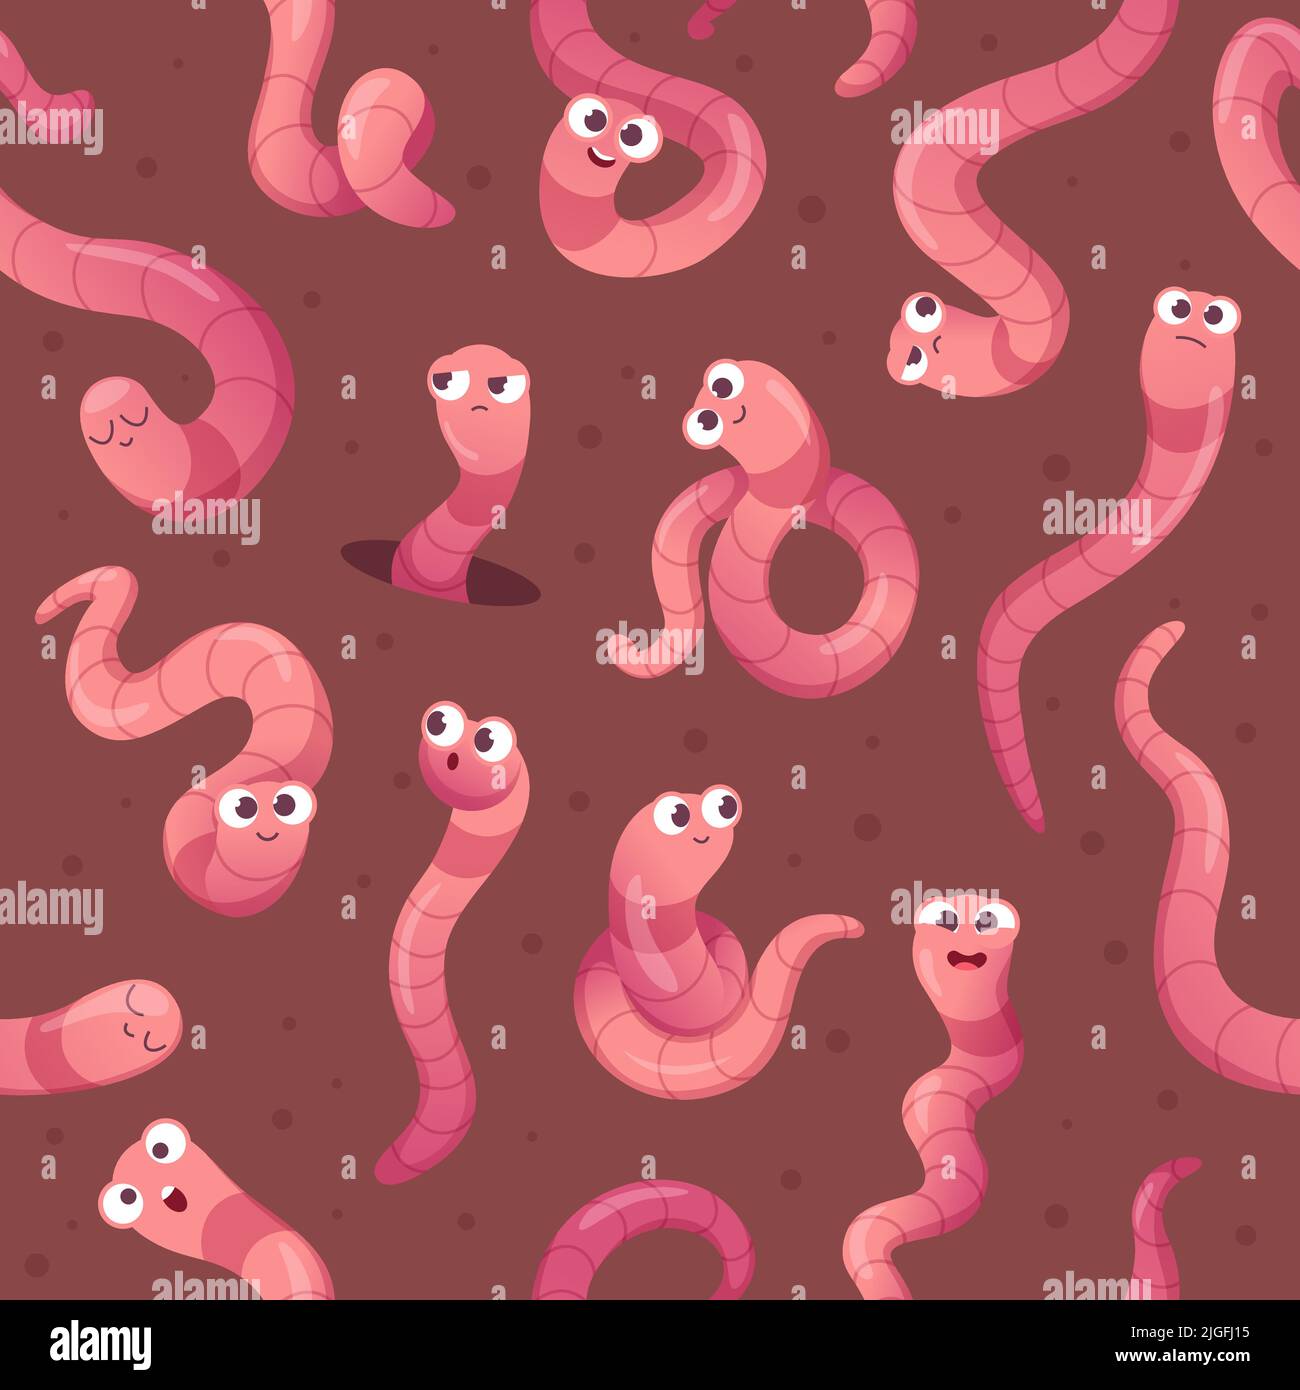 Worms pattern. Crawlers in action poses funny creeping insects in ground exact vector seamless background Stock Vector